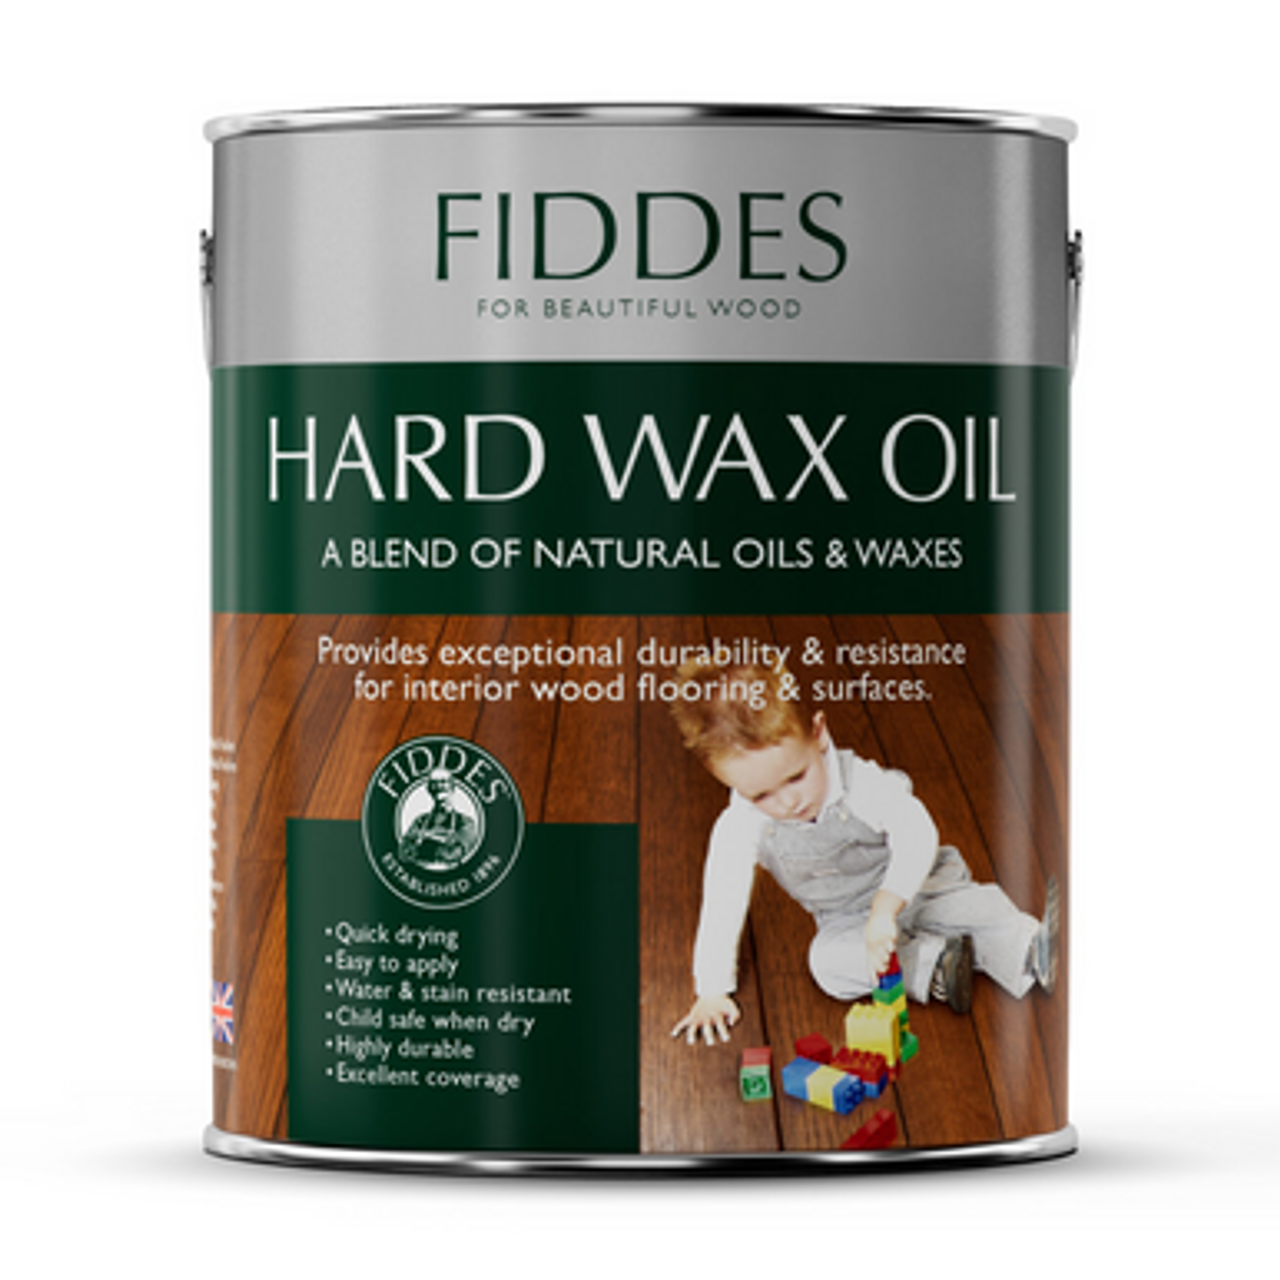 FIDDES Interior | HARDWAX OIL Clear Gloss Interior Timber Protection